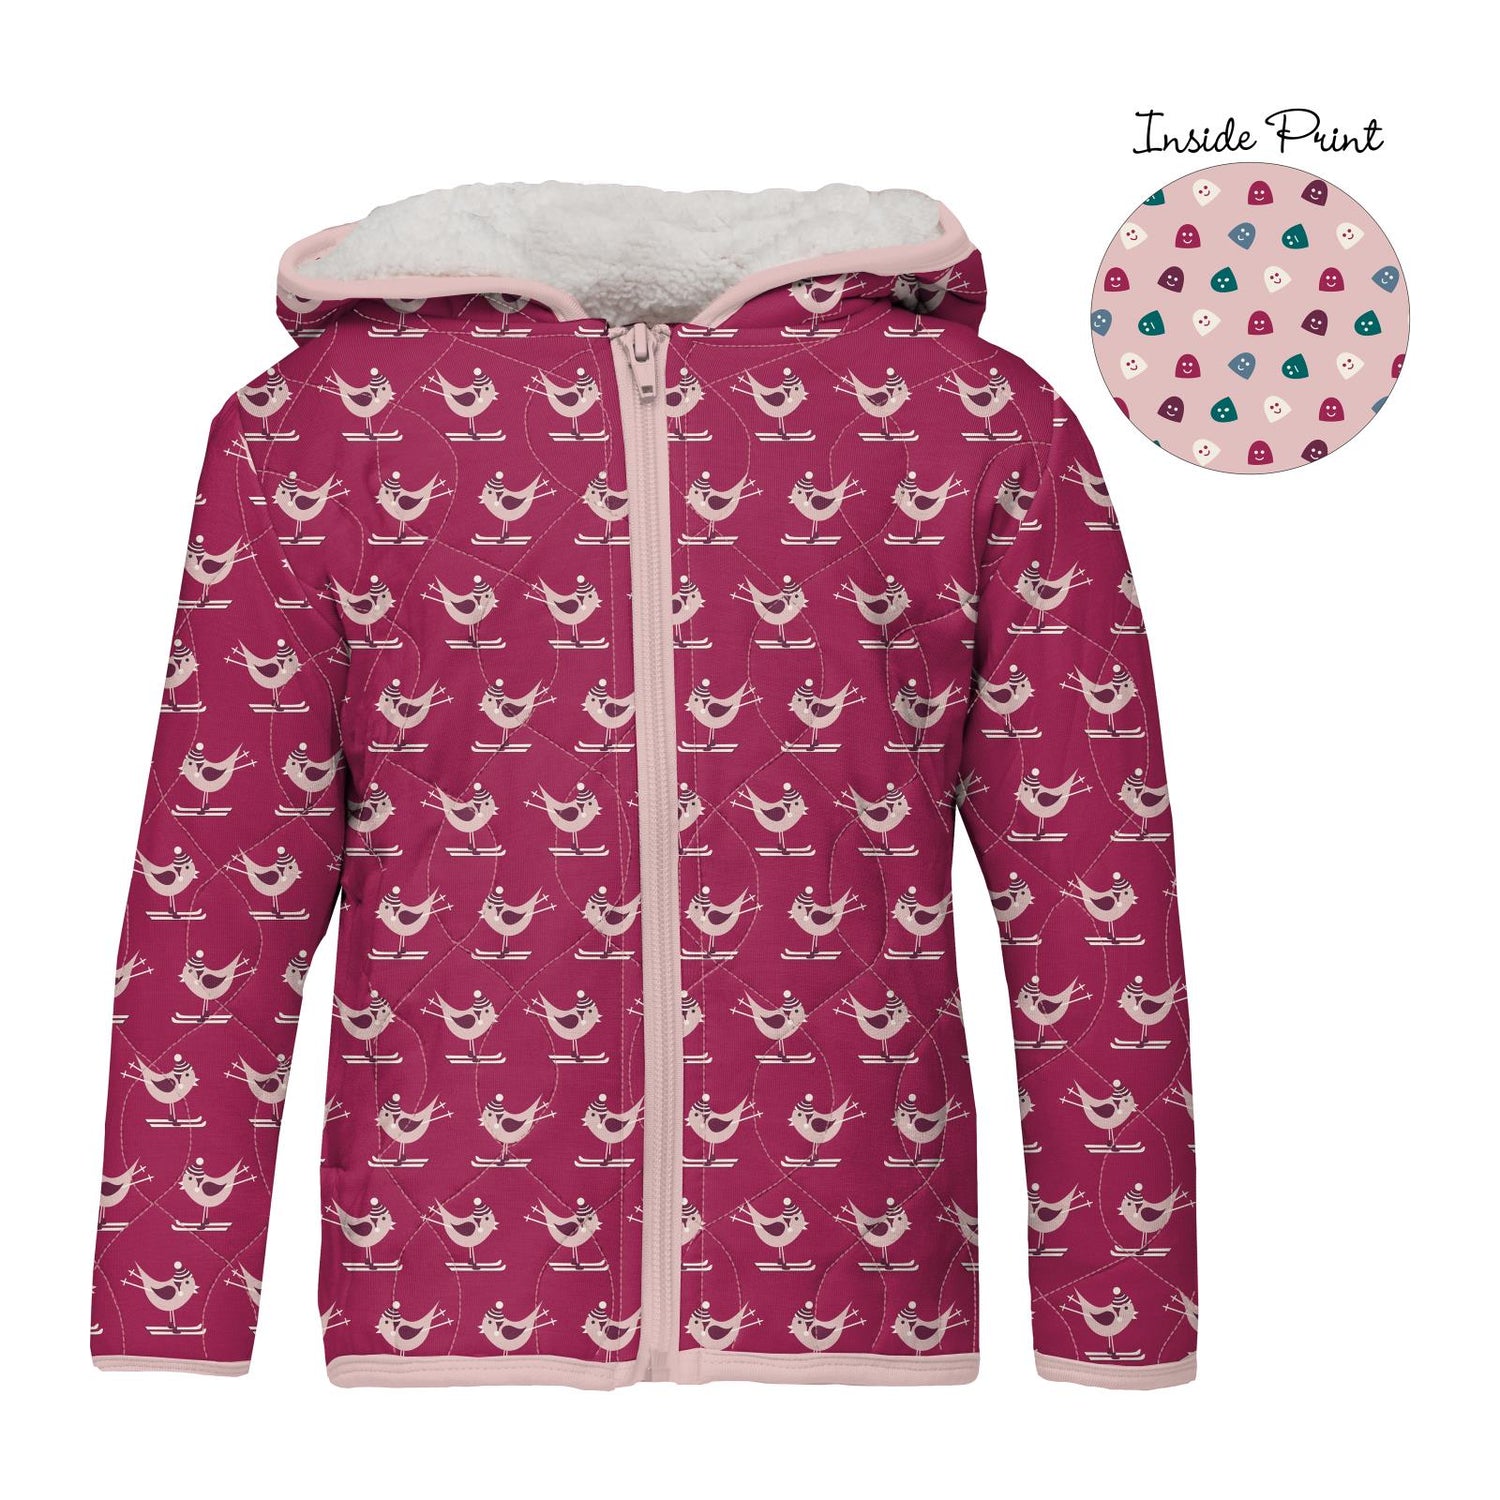 Print Quilted Jacket with Sherpa-Lined Hood in Berry Ski Bird/Baby Rose Happy Gumdrops